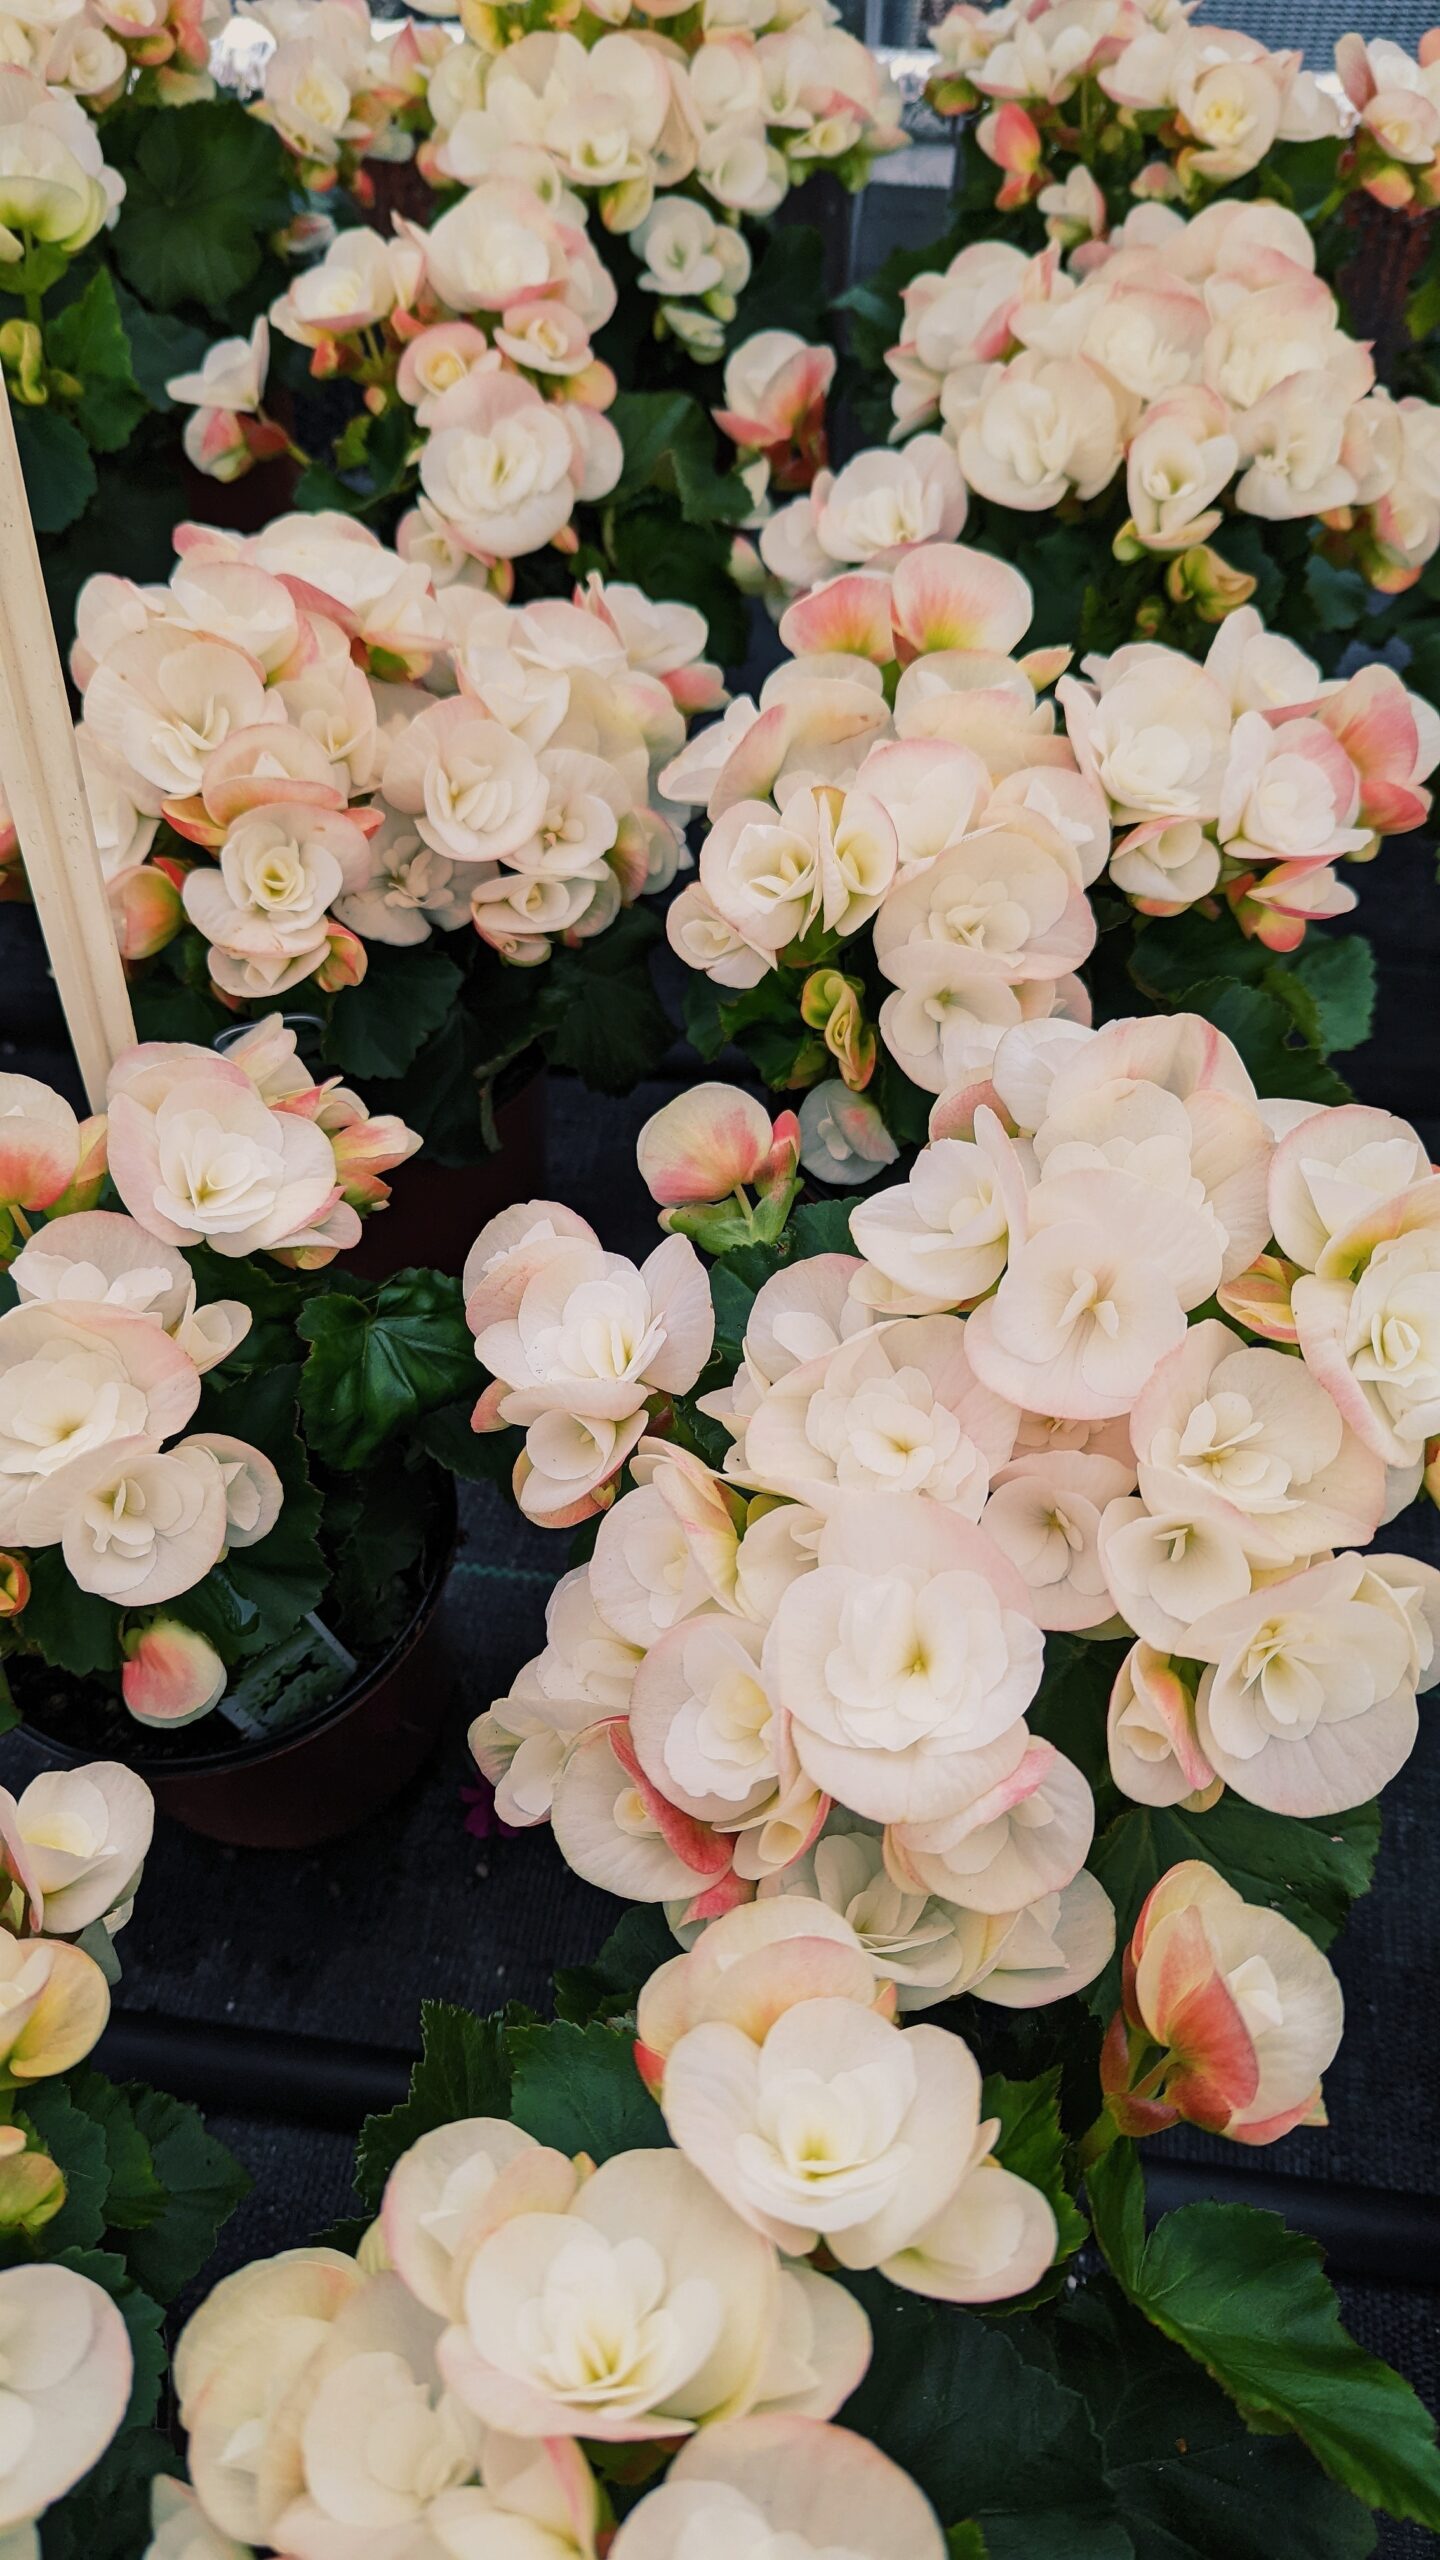 The Most Beautiful Greenhouse Flowers for Cut Arrangements